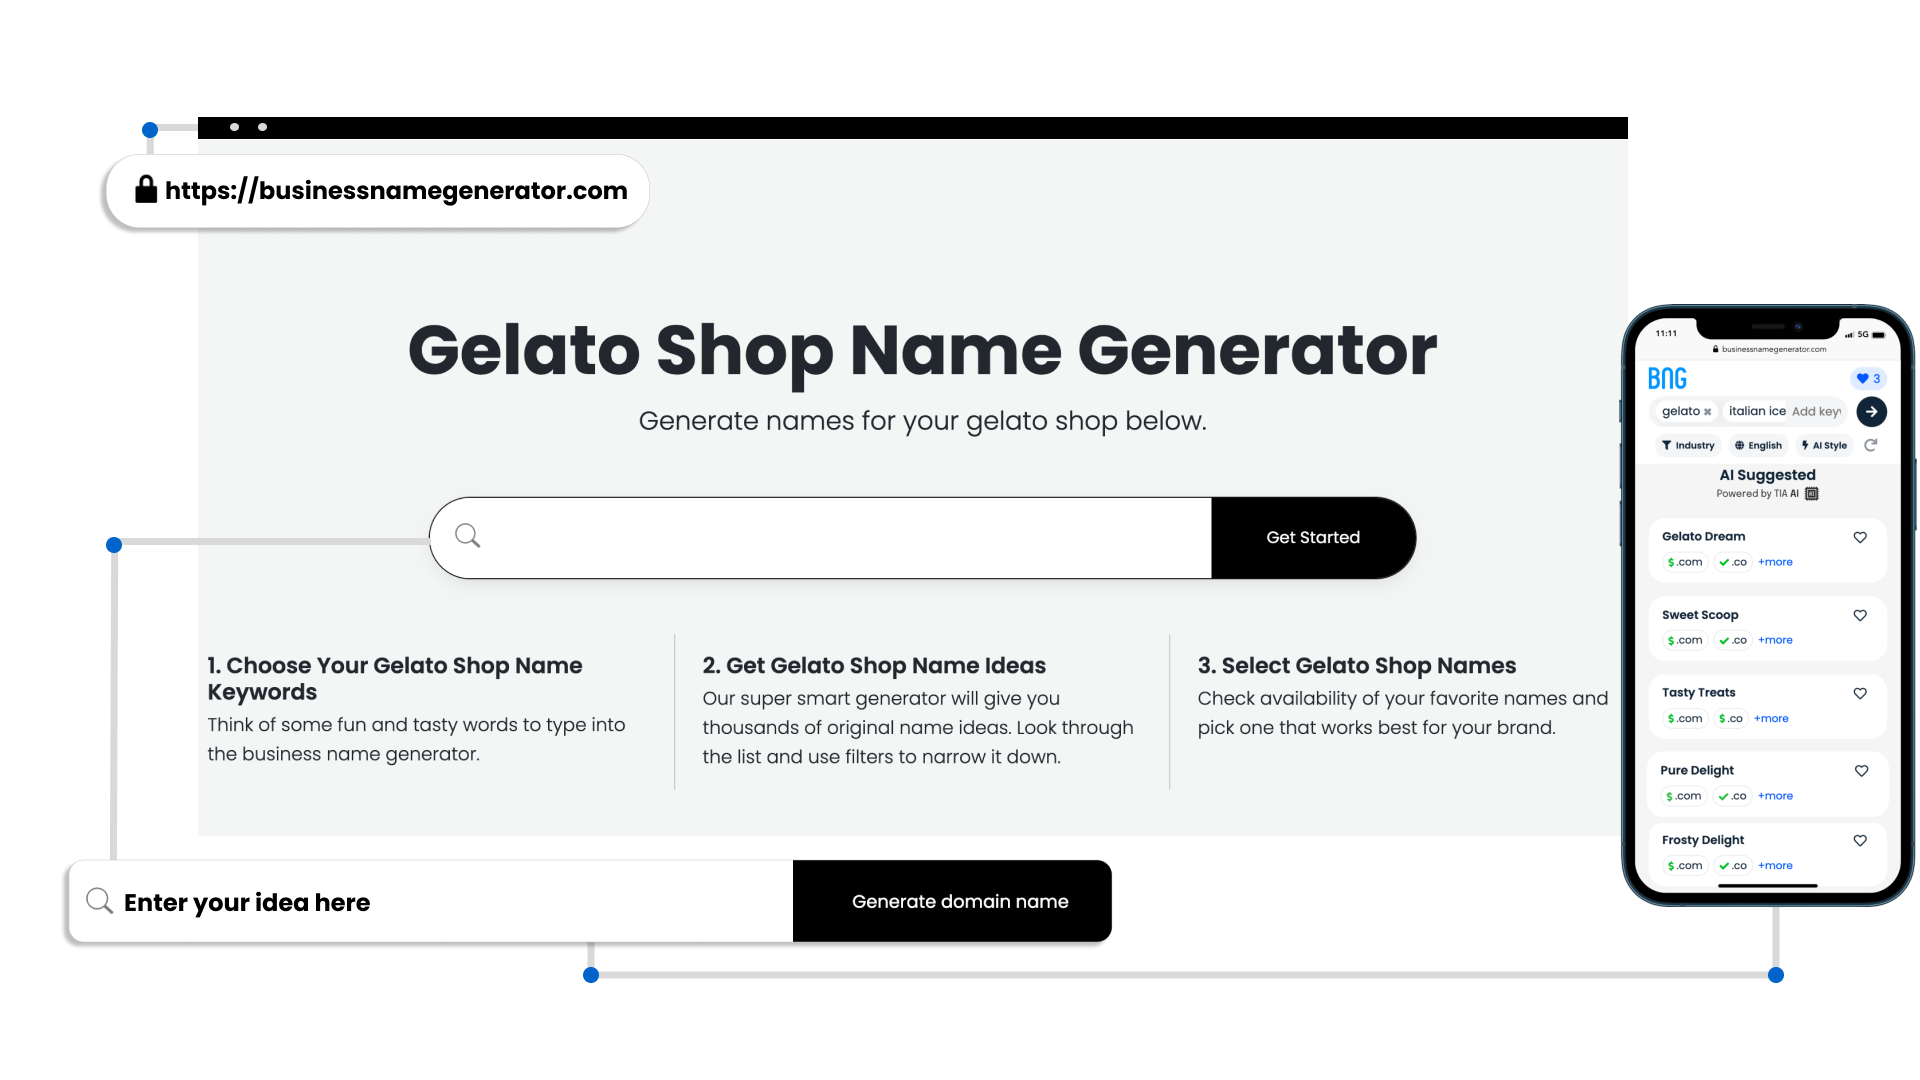 Benefits of Opting Our Gelato Shop Name Generator